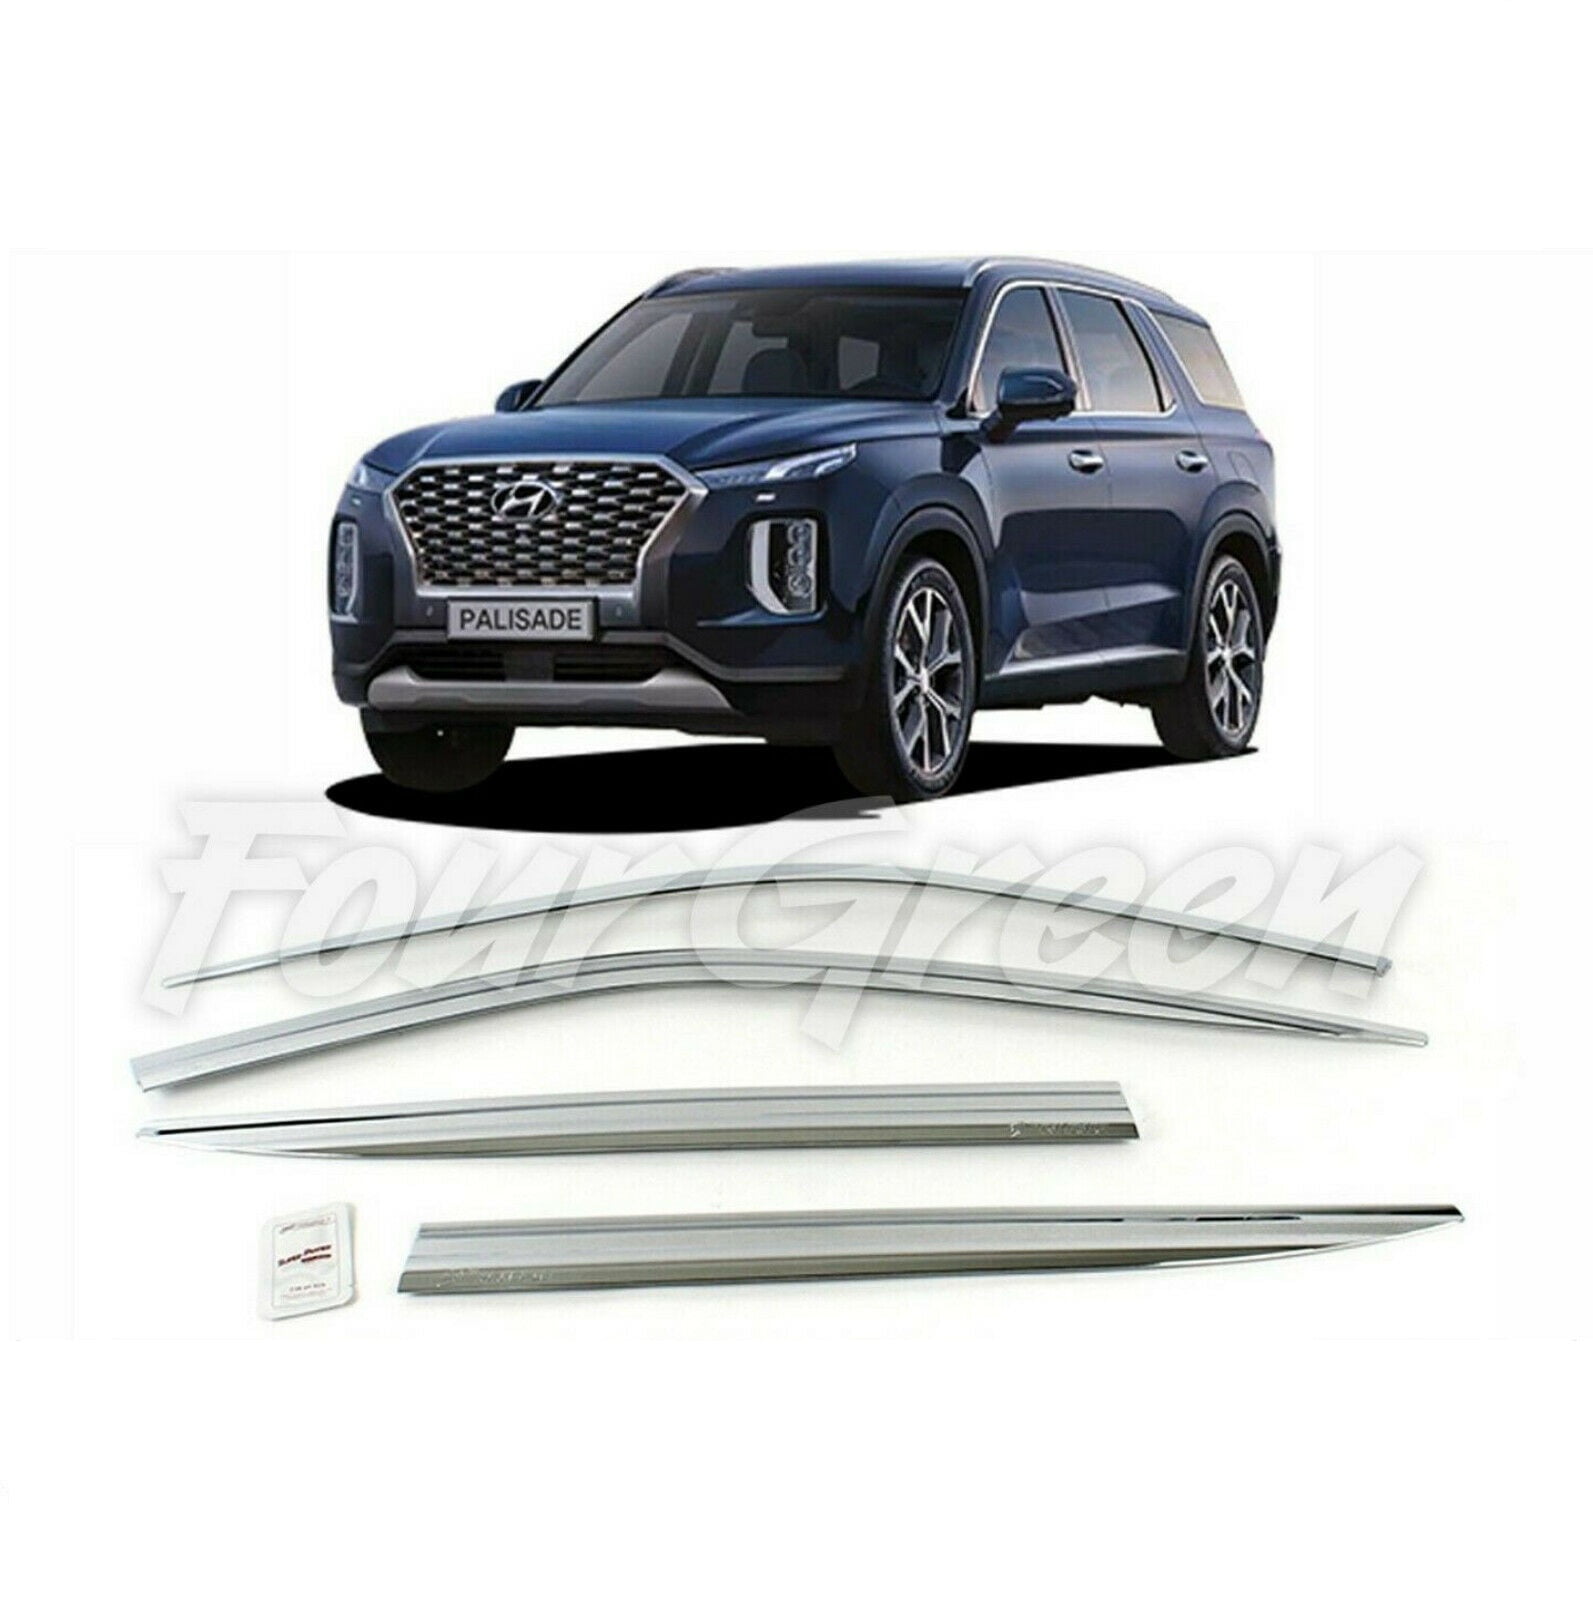 Stainless Steel Hair-line Trunk Step Protect Cover for HYUNDAI 2019-20 Palisade